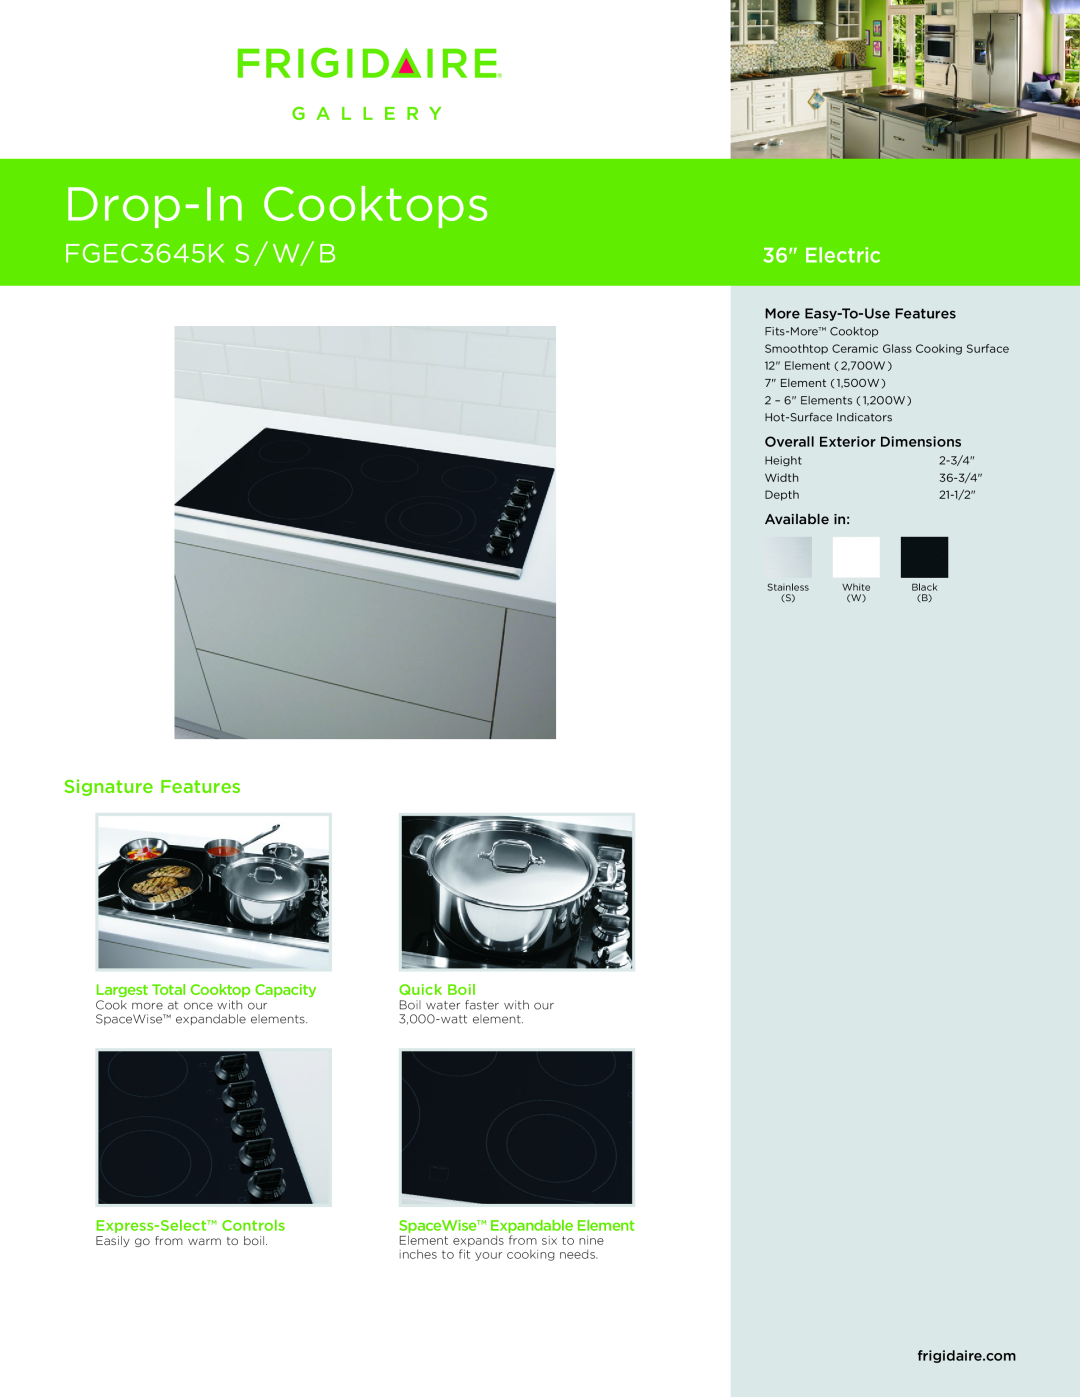 Frigidaire FGEC3645KS, FGEC3645KW, FGEC3645KB important safety instructions Use &Care, All about the, of your Cooktop 